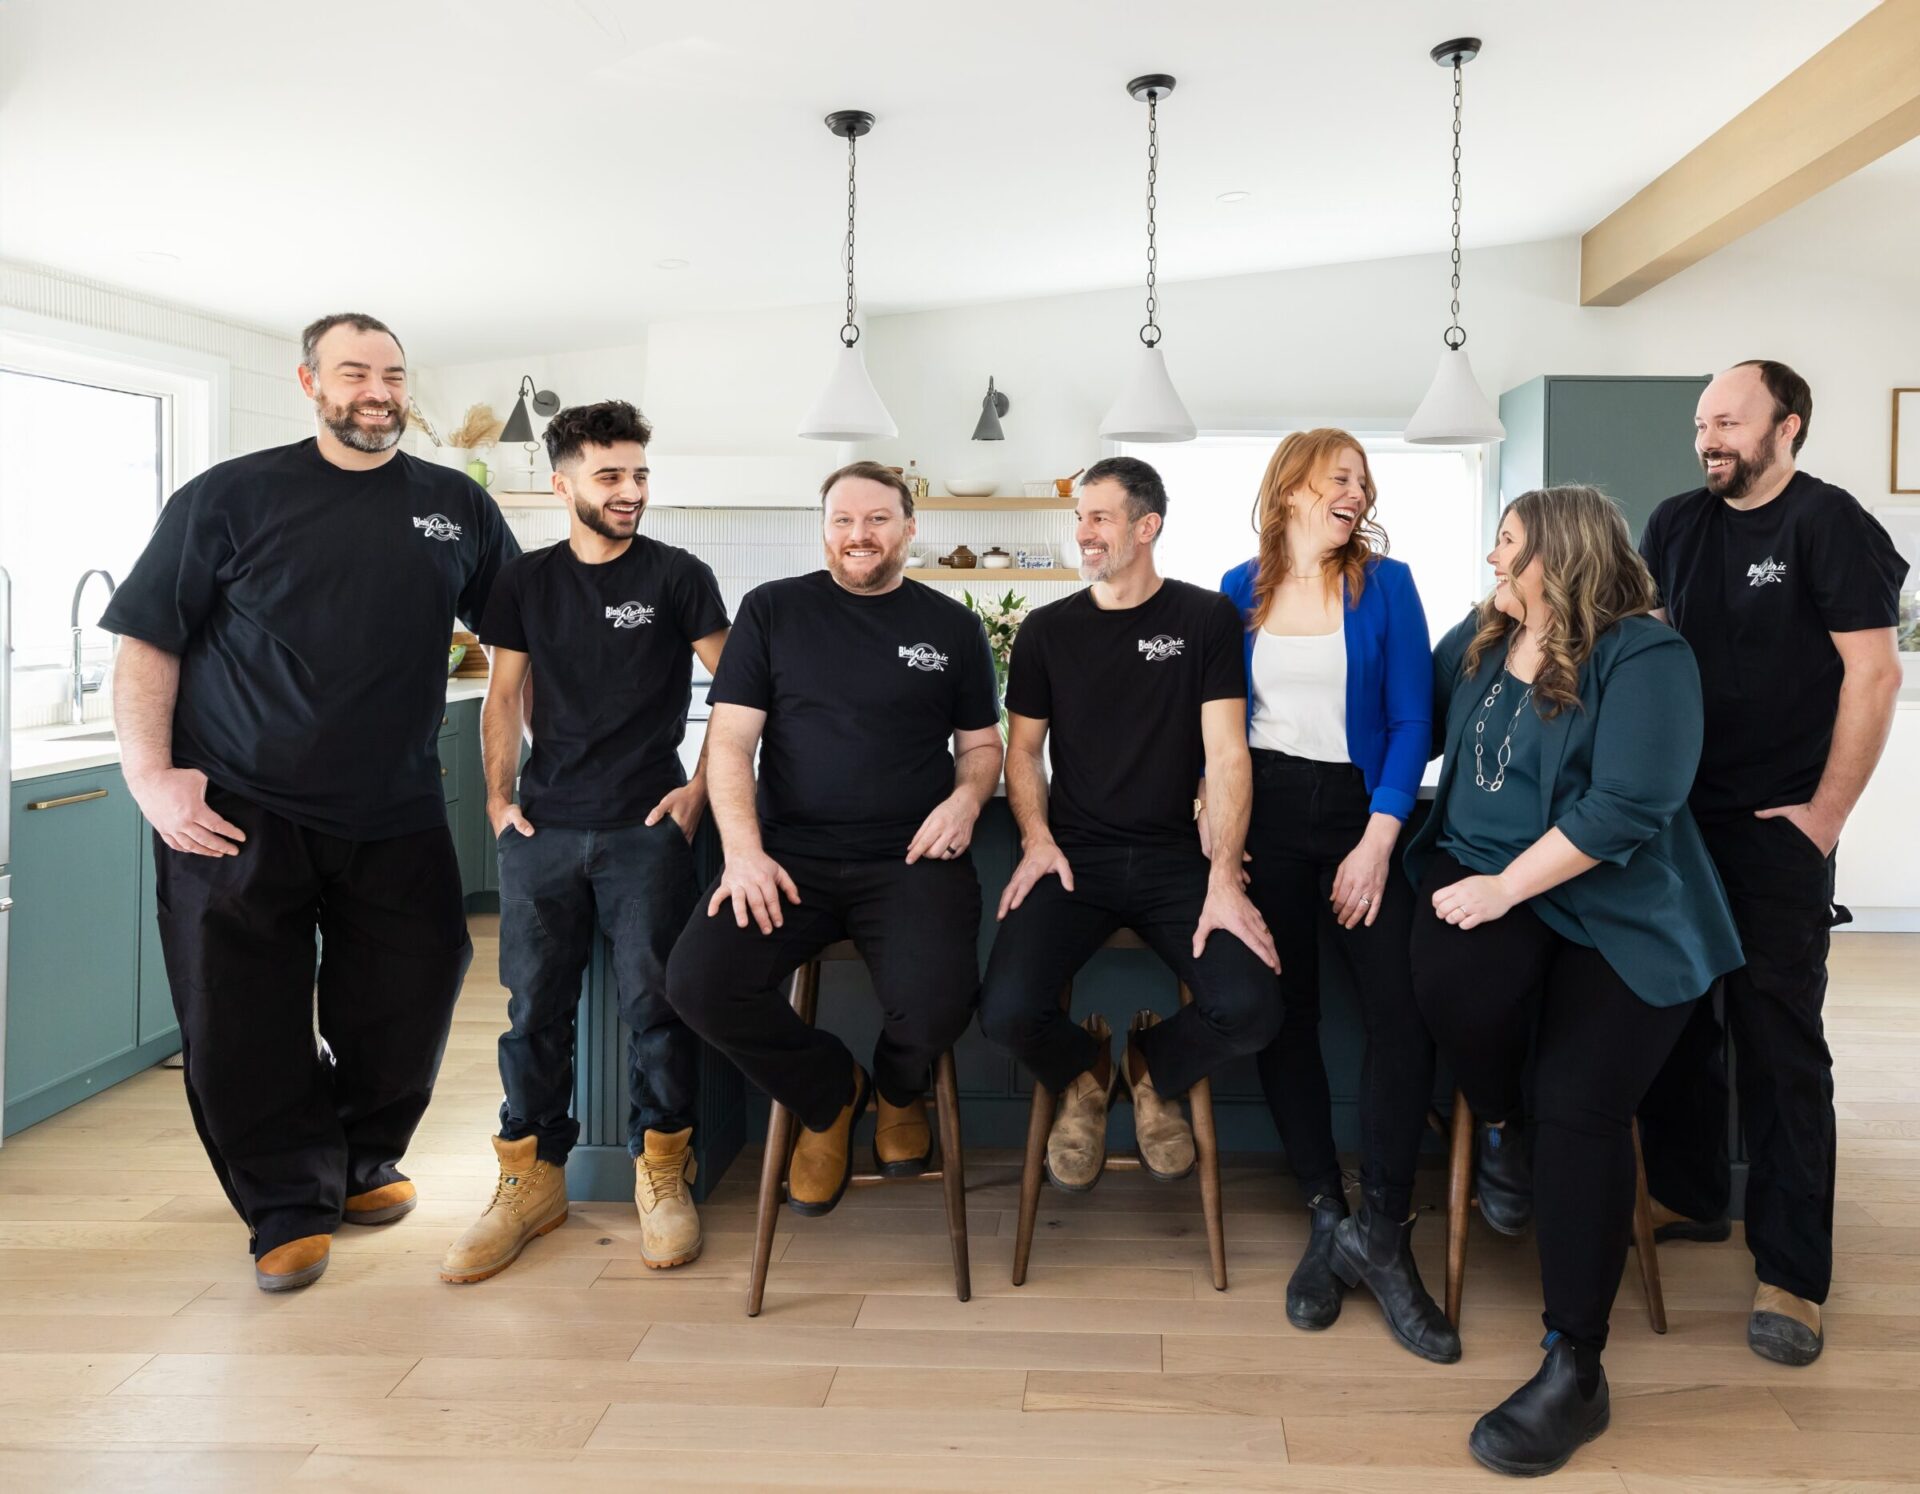 Seven people, some seated on stools, pose smiling in a bright, modern kitchen. Most wear matching black shirts with a logo, suggesting a unified team.